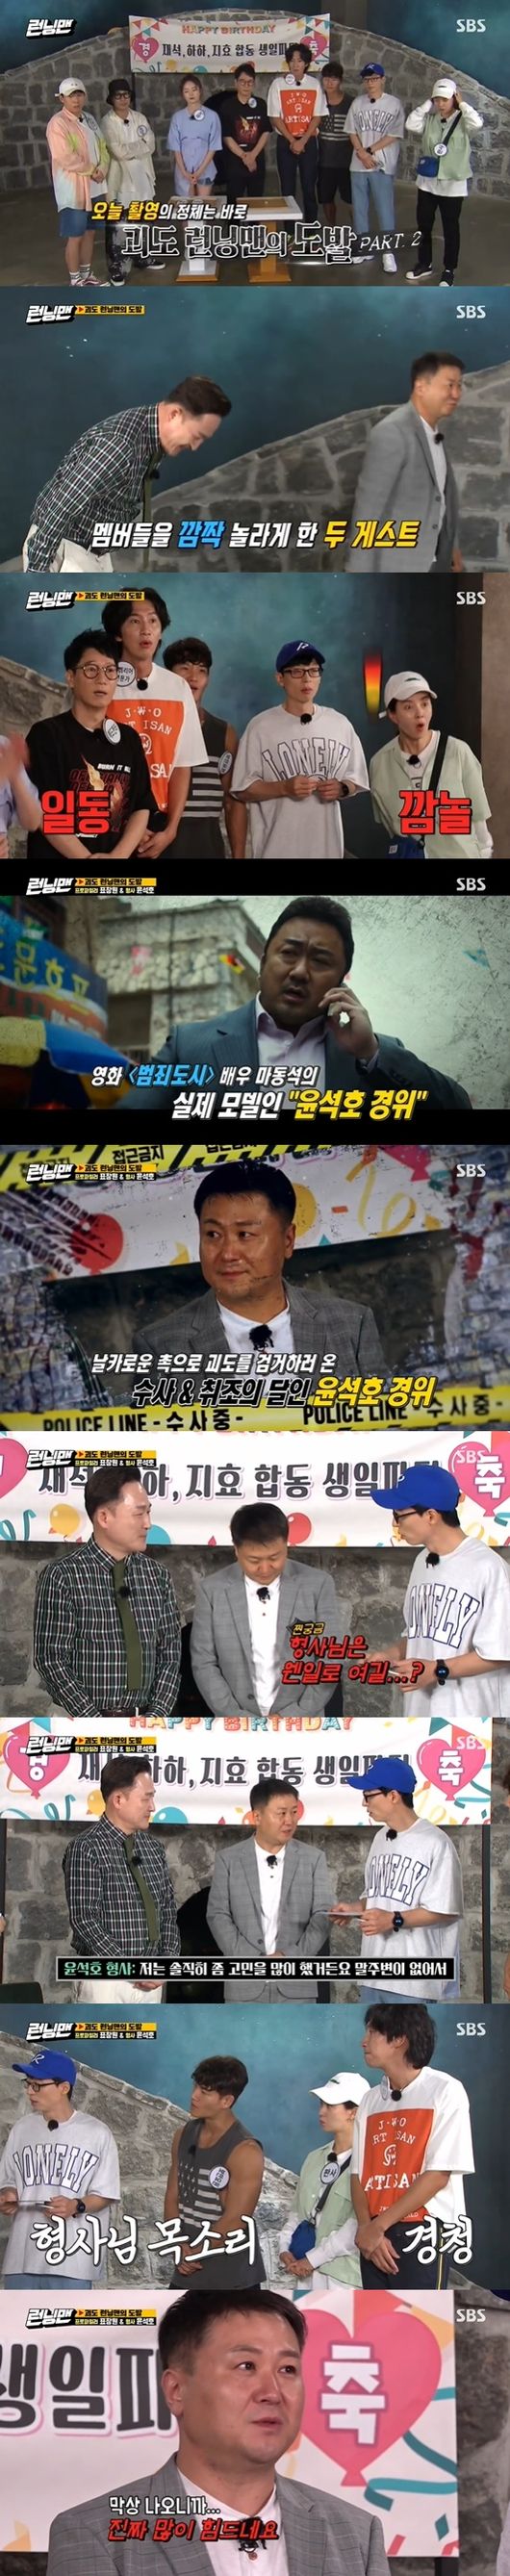 Two of the Running Mans gangs were also caught.SBS Running Man, which was broadcasted on the afternoon of the 6th, was featured in the second episode of Provoking the Goose Running Man as a 10th anniversary special feature, and the first generation Profiler Pyo Chang-won and the actual model of the movie City Ma Dong-Seok, Lieutenant Yoon Seok-ho appeared.Jeon So-min, who arrived at the recording site as the No. 1 spot, came earlier than standby time to pick a job on a first-come, first-served basis, with Jeon So-min saying: Why dont I work for anyone?I said, Why did the staff come early and come to the scene? He laughed at the scene where the warm-hearted virtue came and went.Jeon So-min is Anonymous, Yang Se-chan is audio director, Haha is J.A.Martin Photographer, Yoo Jae-Suk was the prosecutor, Lee Kwang-soo was the interior expert, Ji Suk-jin was the headhunter, Kim Jong-kook was the security guard, and Song Ji-hyo was the judge.Pyo Chang-won participated in the commission as Profiler and Yoon Seok-ho as Detective.The two guests appeared on the scene after watching the members choose their jobs, and were greatly surprised when Pyo Chang-won and Yoon Seok-ho appeared. The members said, It is hard to see in the arts.What if I take it so seriously? Its a big hit, he said.Yoo Jae-Suk asked, What did Detective appear for? And Yoon Seok-ho said, I was honestly worried because I did not have any surroundings.But it is really hard to come out, he confessed and laughed.Lieutenant Yoon Seok-ho, who is acquainted with Ji Suk-jin, said, I learned it by introduction of an acquaintance 10 years ago. Ji Suk-jin said, The face looks mild, but it is different when dealing with criminals.Crime City. Did you see that? This is the real model of Ma Dong-Seok.The provocation of the Goose Running Man is a candidate for all 10 people, a two-person arrest product, and a penalty in case of failure.The method of the arrest method confirms the existence of the two Suspects, and the one who is arrested through voting.Two members move to a room with jewels, each room is CAUTHT in the Web for 70 seconds, and the mission is performed, and the bottom two rooms are revealed.Only one of A and B is a real jewelry store, and one is a room with only fake jewelry.Lieutenant Yoon Seok-ho said, The first feeling is honestly Jeon So-min.I am the early one on the recording site, Haha said, he is originally over-the-top style, and Kim Jong-kook said, but today it is a little strange.Pyo Chang-won said, If it is a gangster, it is a good job to steal, a good job to hide your identity.And it is a job that can confuse the ruling, and it seems that two people have been Choices for the job. Director Pyo Chang-won, who detailed the members observations, continued the scientific investigation based on Packt.Yang Se-chan said, Murder, She Wrote should be done this way, but I should not do Murder, She Wrote with my expression and tone every day. Lee Kwang-soo expressed confidence that The first trial time is approaching, and prosecutor Yoo Jae-Suk is the second person to be put on trial.Martin Photographer Haha and Anonymous Jeon So-min were Choices; of the two, there was a goose, and citizens succeeded in finding the goose.Yoon Seok-ho, who finished the second room Caught in the Web, said, My bag is heavy, this is fun. Someone said that he moved the jewel from A room.It was a heavy, tight, no matter who saw it in my Seokho brothers bag, Yang Se-chan said.The crew said, If the number of jewels stolen by thieves is not arrested, it is a mission success.J.A.Martin Photographer Haha released a picture of the room Caught in the Web, and at this time Yoon Seok-ho Detective suspected that Pyo Chang-won seems to open this.Pyo Chang-won said, Why is Yoon Detective?I am so embarrassed now, he said. I am narrowing my criminal now, but suddenly I am changing my point. Yoon Seok-ho, Detective, said, I am sorry for your senior, but I do not think that the picture seems to open the bag.The most votes had to go to the decision by vote, and Jeon So-min went up to the second trial The Suspect; it turned out that the identity of Jeon So-min was a gangster.The last room had Caught in the Web time, and the final number of jewels stolen by the gangsters was 352, members said, Somin stole it all with confidence.Then Yoon Detective is a little bit of The Suspect. Pyo Chang-won Profiler and Yoon Seok-ho Detective defended each and insisted that it was not an absolute gangster.Yoo Jae-Suk said, I will ask you one last time. Who is the last person in the B room and the third person in the B room?The only person who has been in room B is Haha. There is no Haha in this picture. Haha, who did not greed for room A, said it was suspicious.The final Suspect one to go up to the third was Haha, and Hahas identity was a goose.Citizens won the final victory, and from the beginning, Yoo Jae-suk and Kim Jong-kook, who suspected the two, were horrified.Running Man screen captures